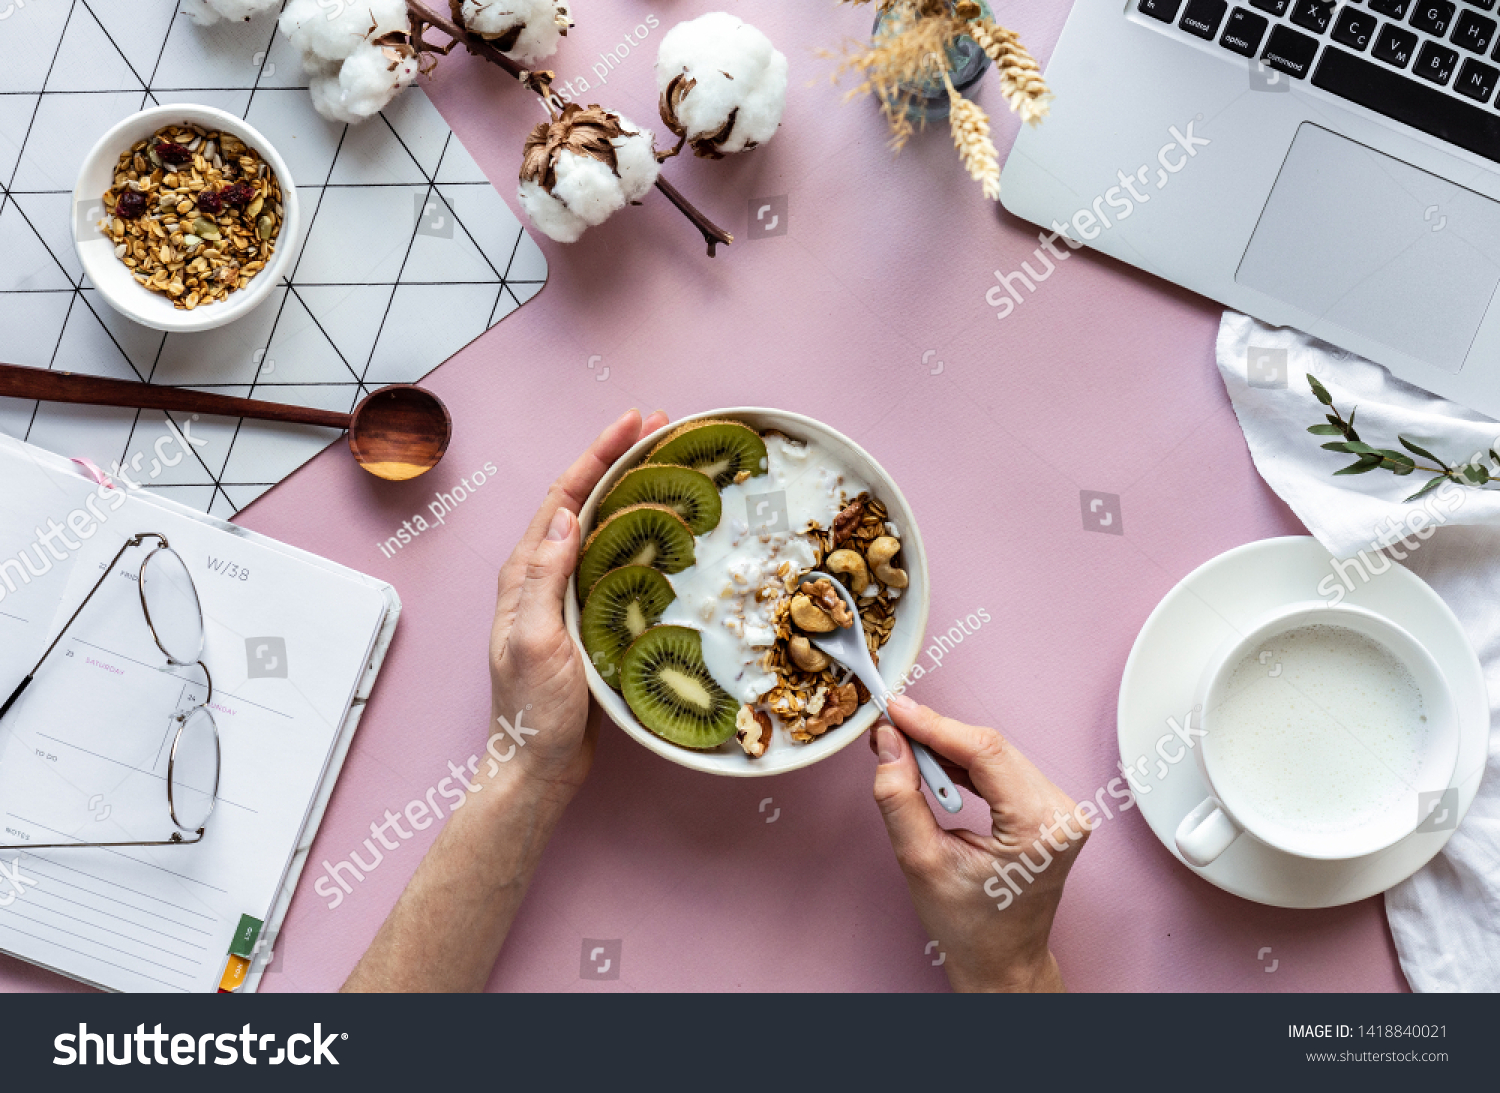 Female hand hold spoon over healthy breakfast concept bowl enjoy detox morning meal on work table background with laptop milk, woman eat natural granola nutrition detox food in home office, top view #1418840021